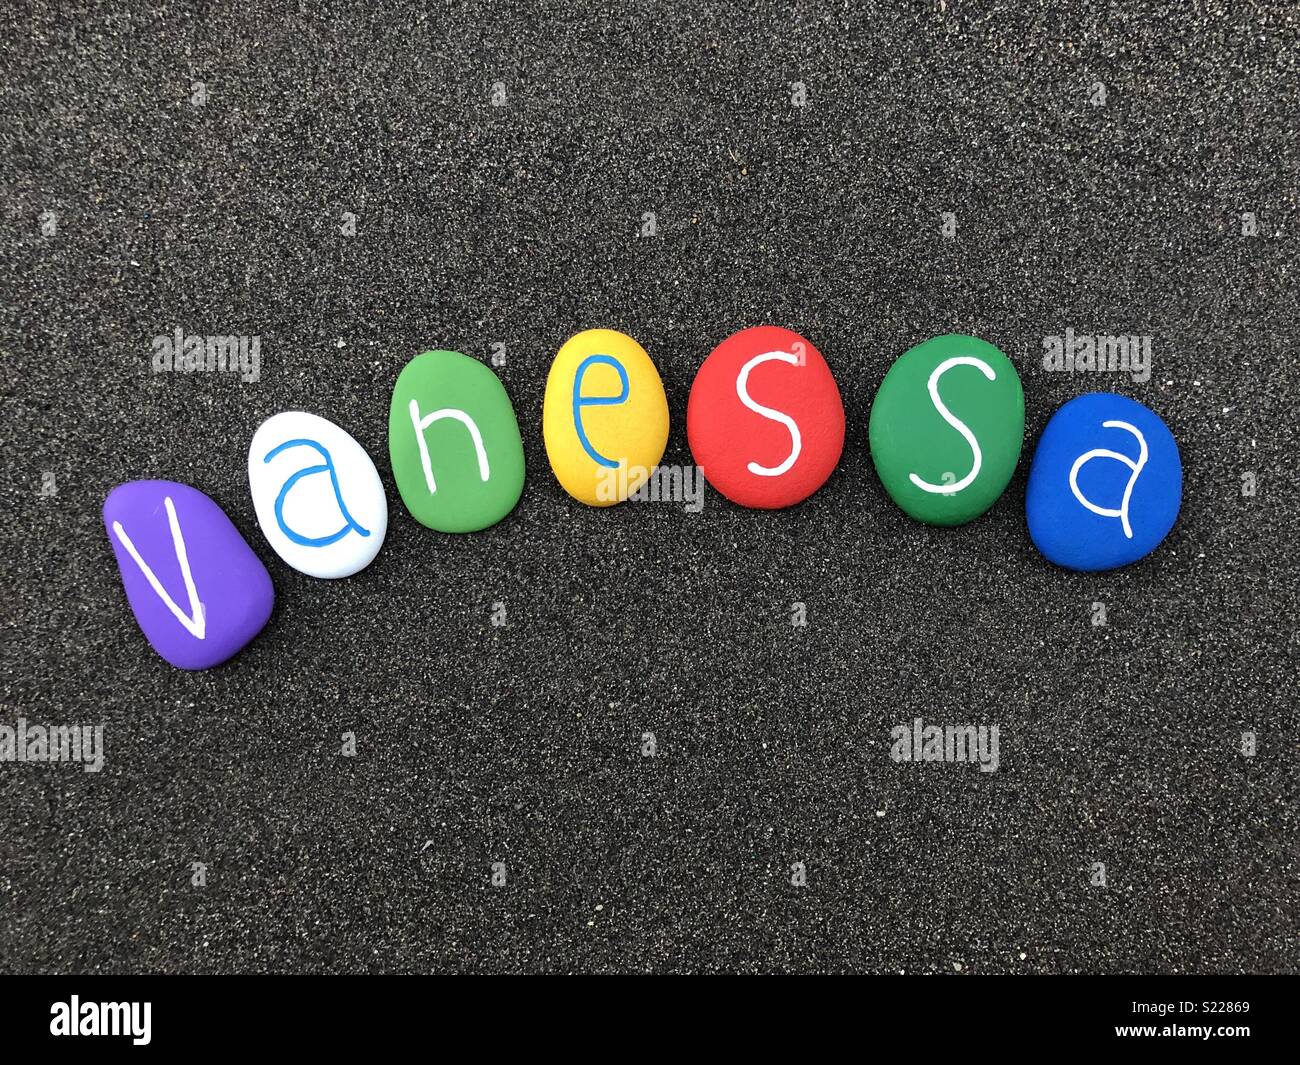 Vanessa, feminine given name with multicolored stones over black volcanic sand Stock Photo